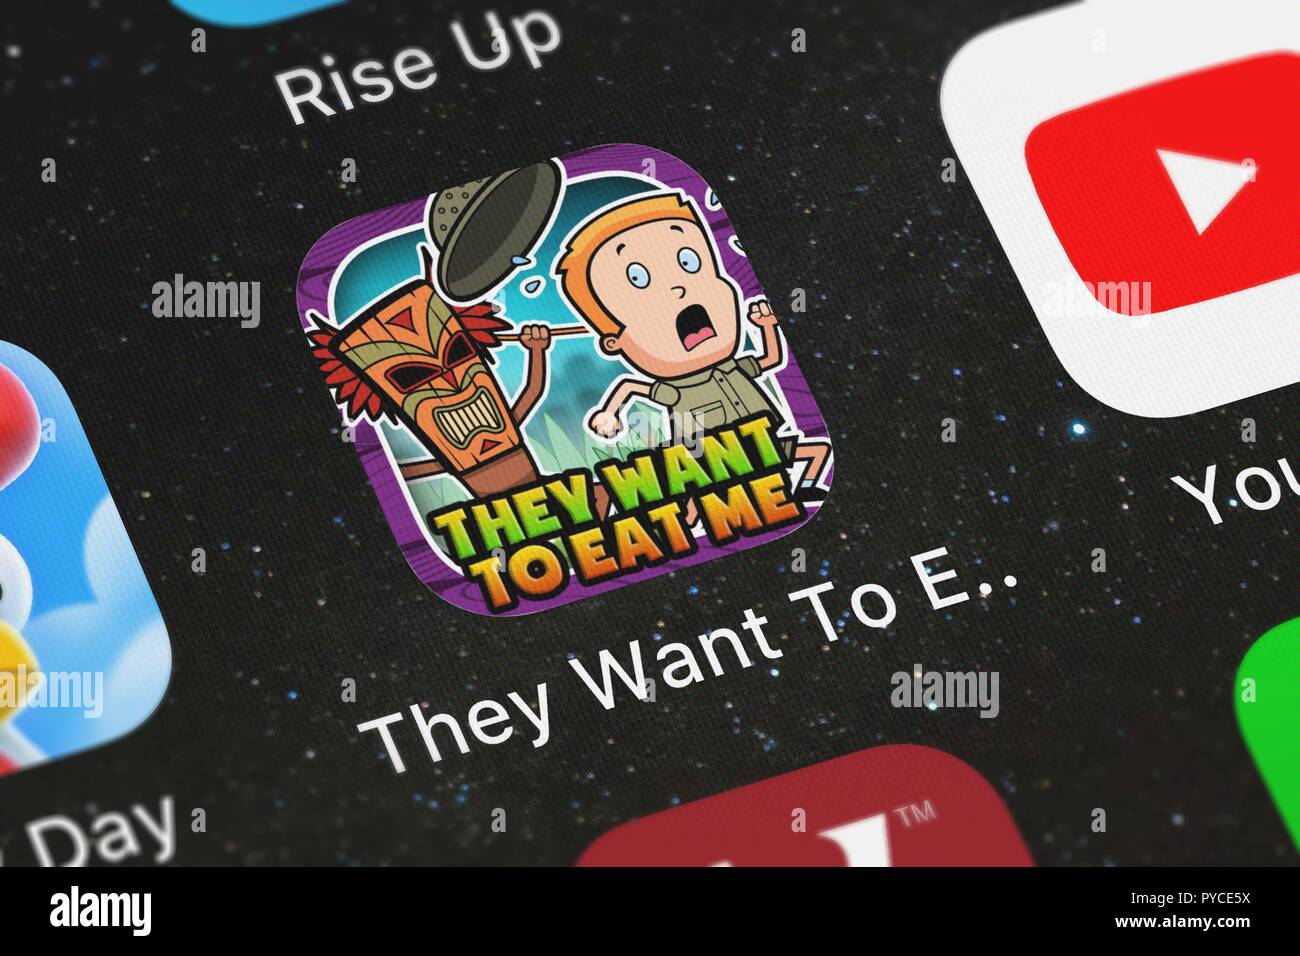 London, United Kingdom - October 26, 2018: Close-up of the They Want To Eat Me icon from Psycho Bear Studios on an iPhone. Stock Photo